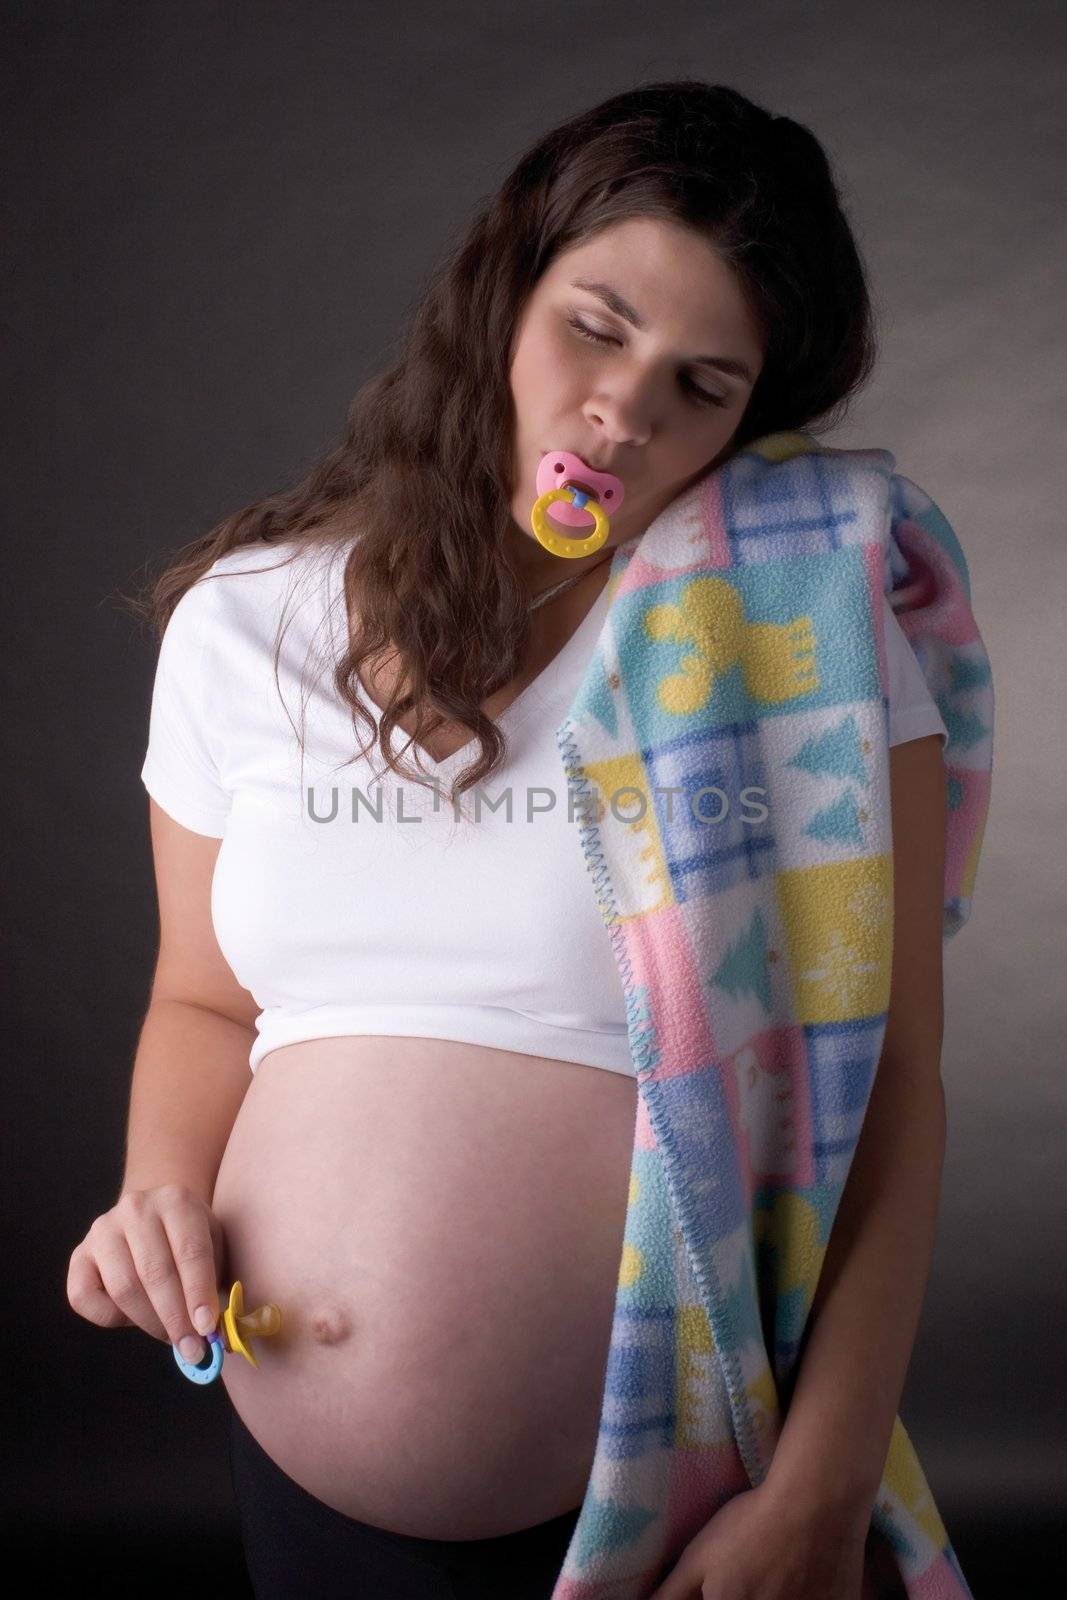 Seven month pregnant women sucking on a pacifier and offering one to her belly